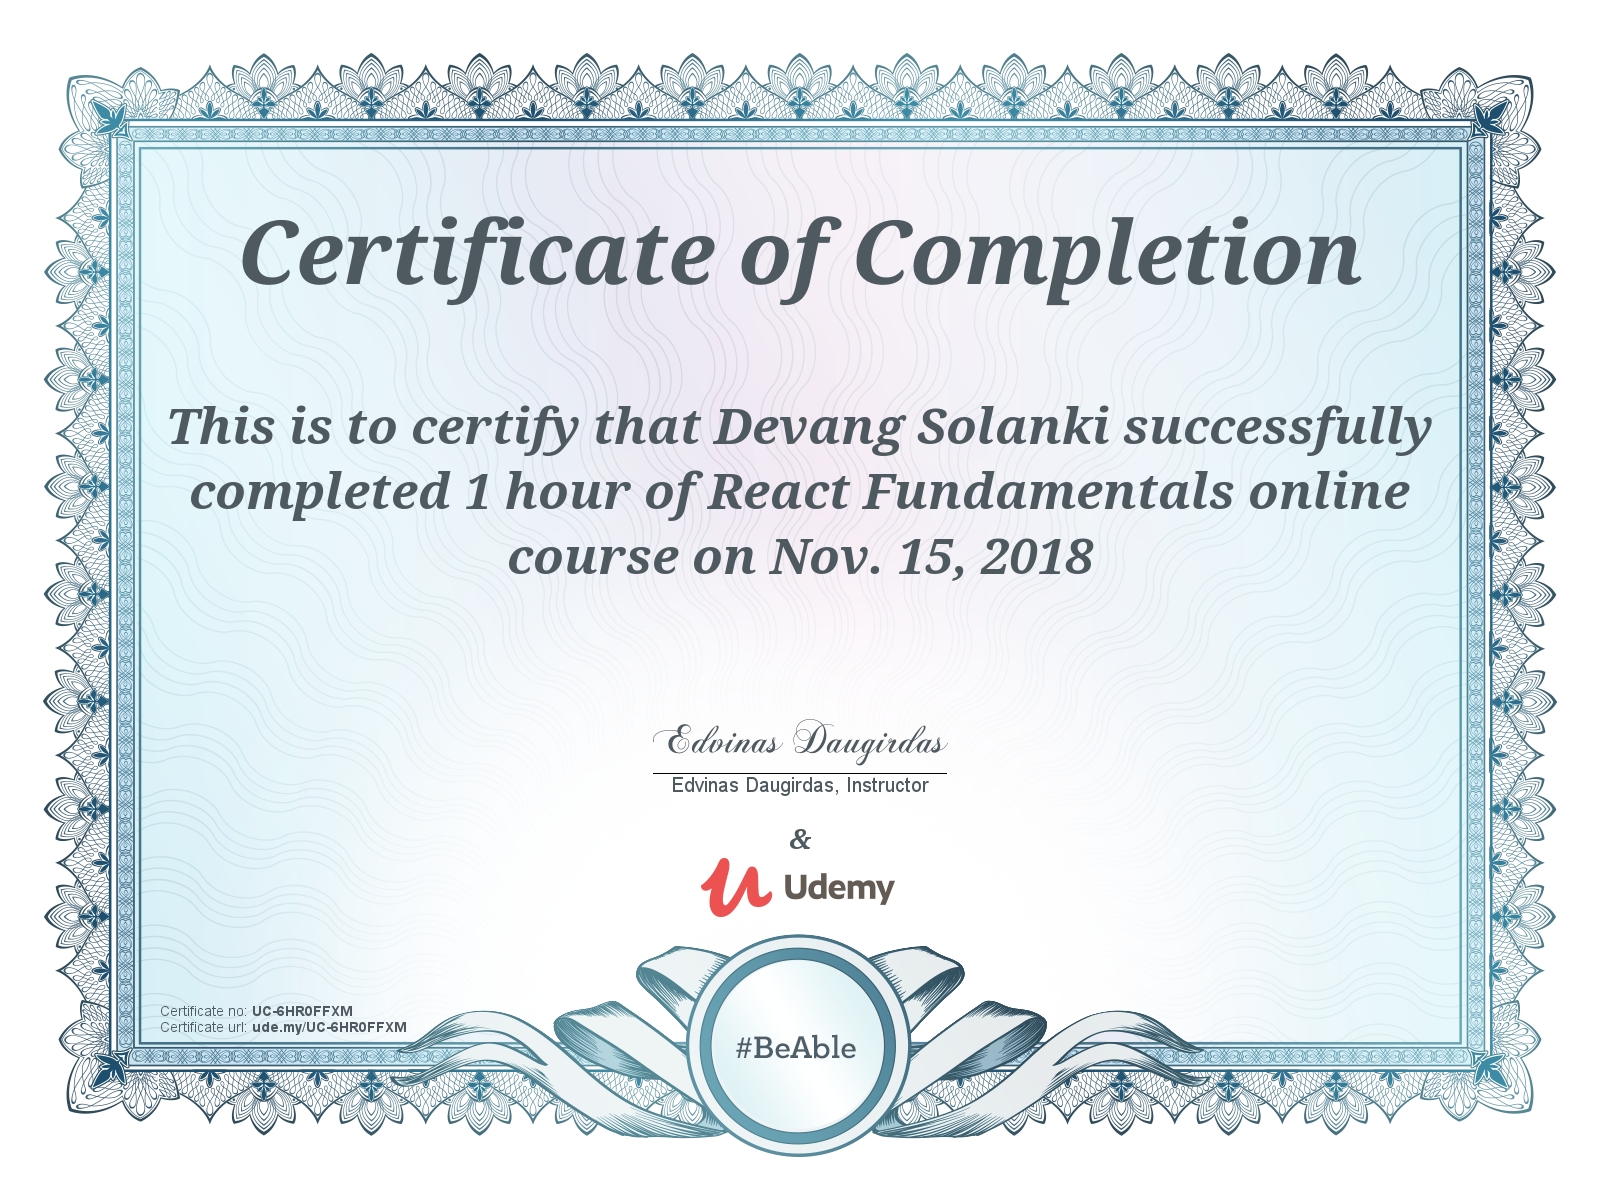 Devang Solanki Certify Completion of Learn JavaScript Fundamentals